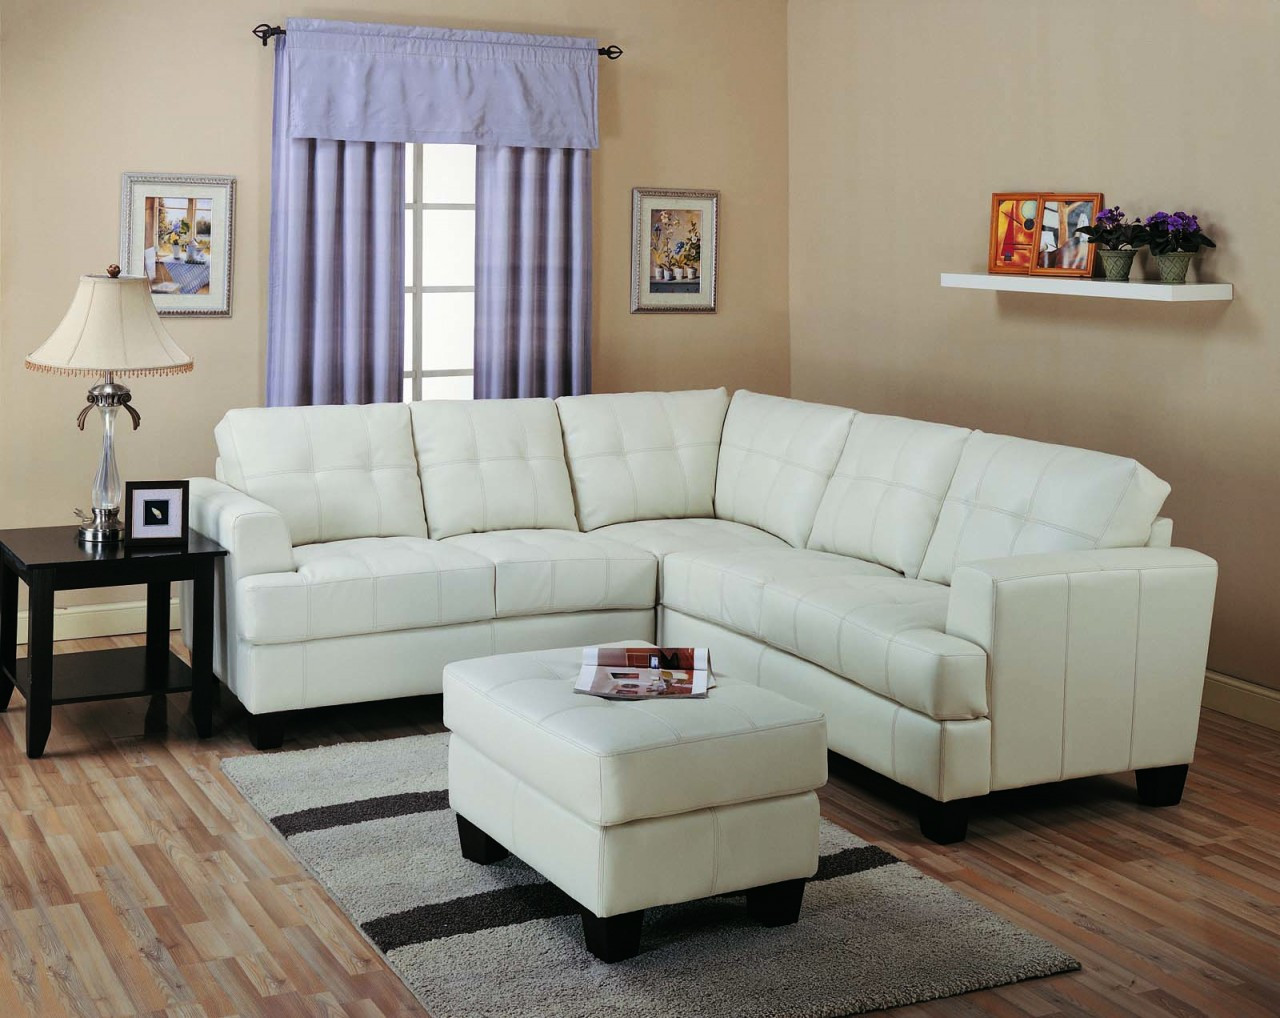 Small Living Room With Sectional
 Types of Best Small Sectional Couches for Small Living